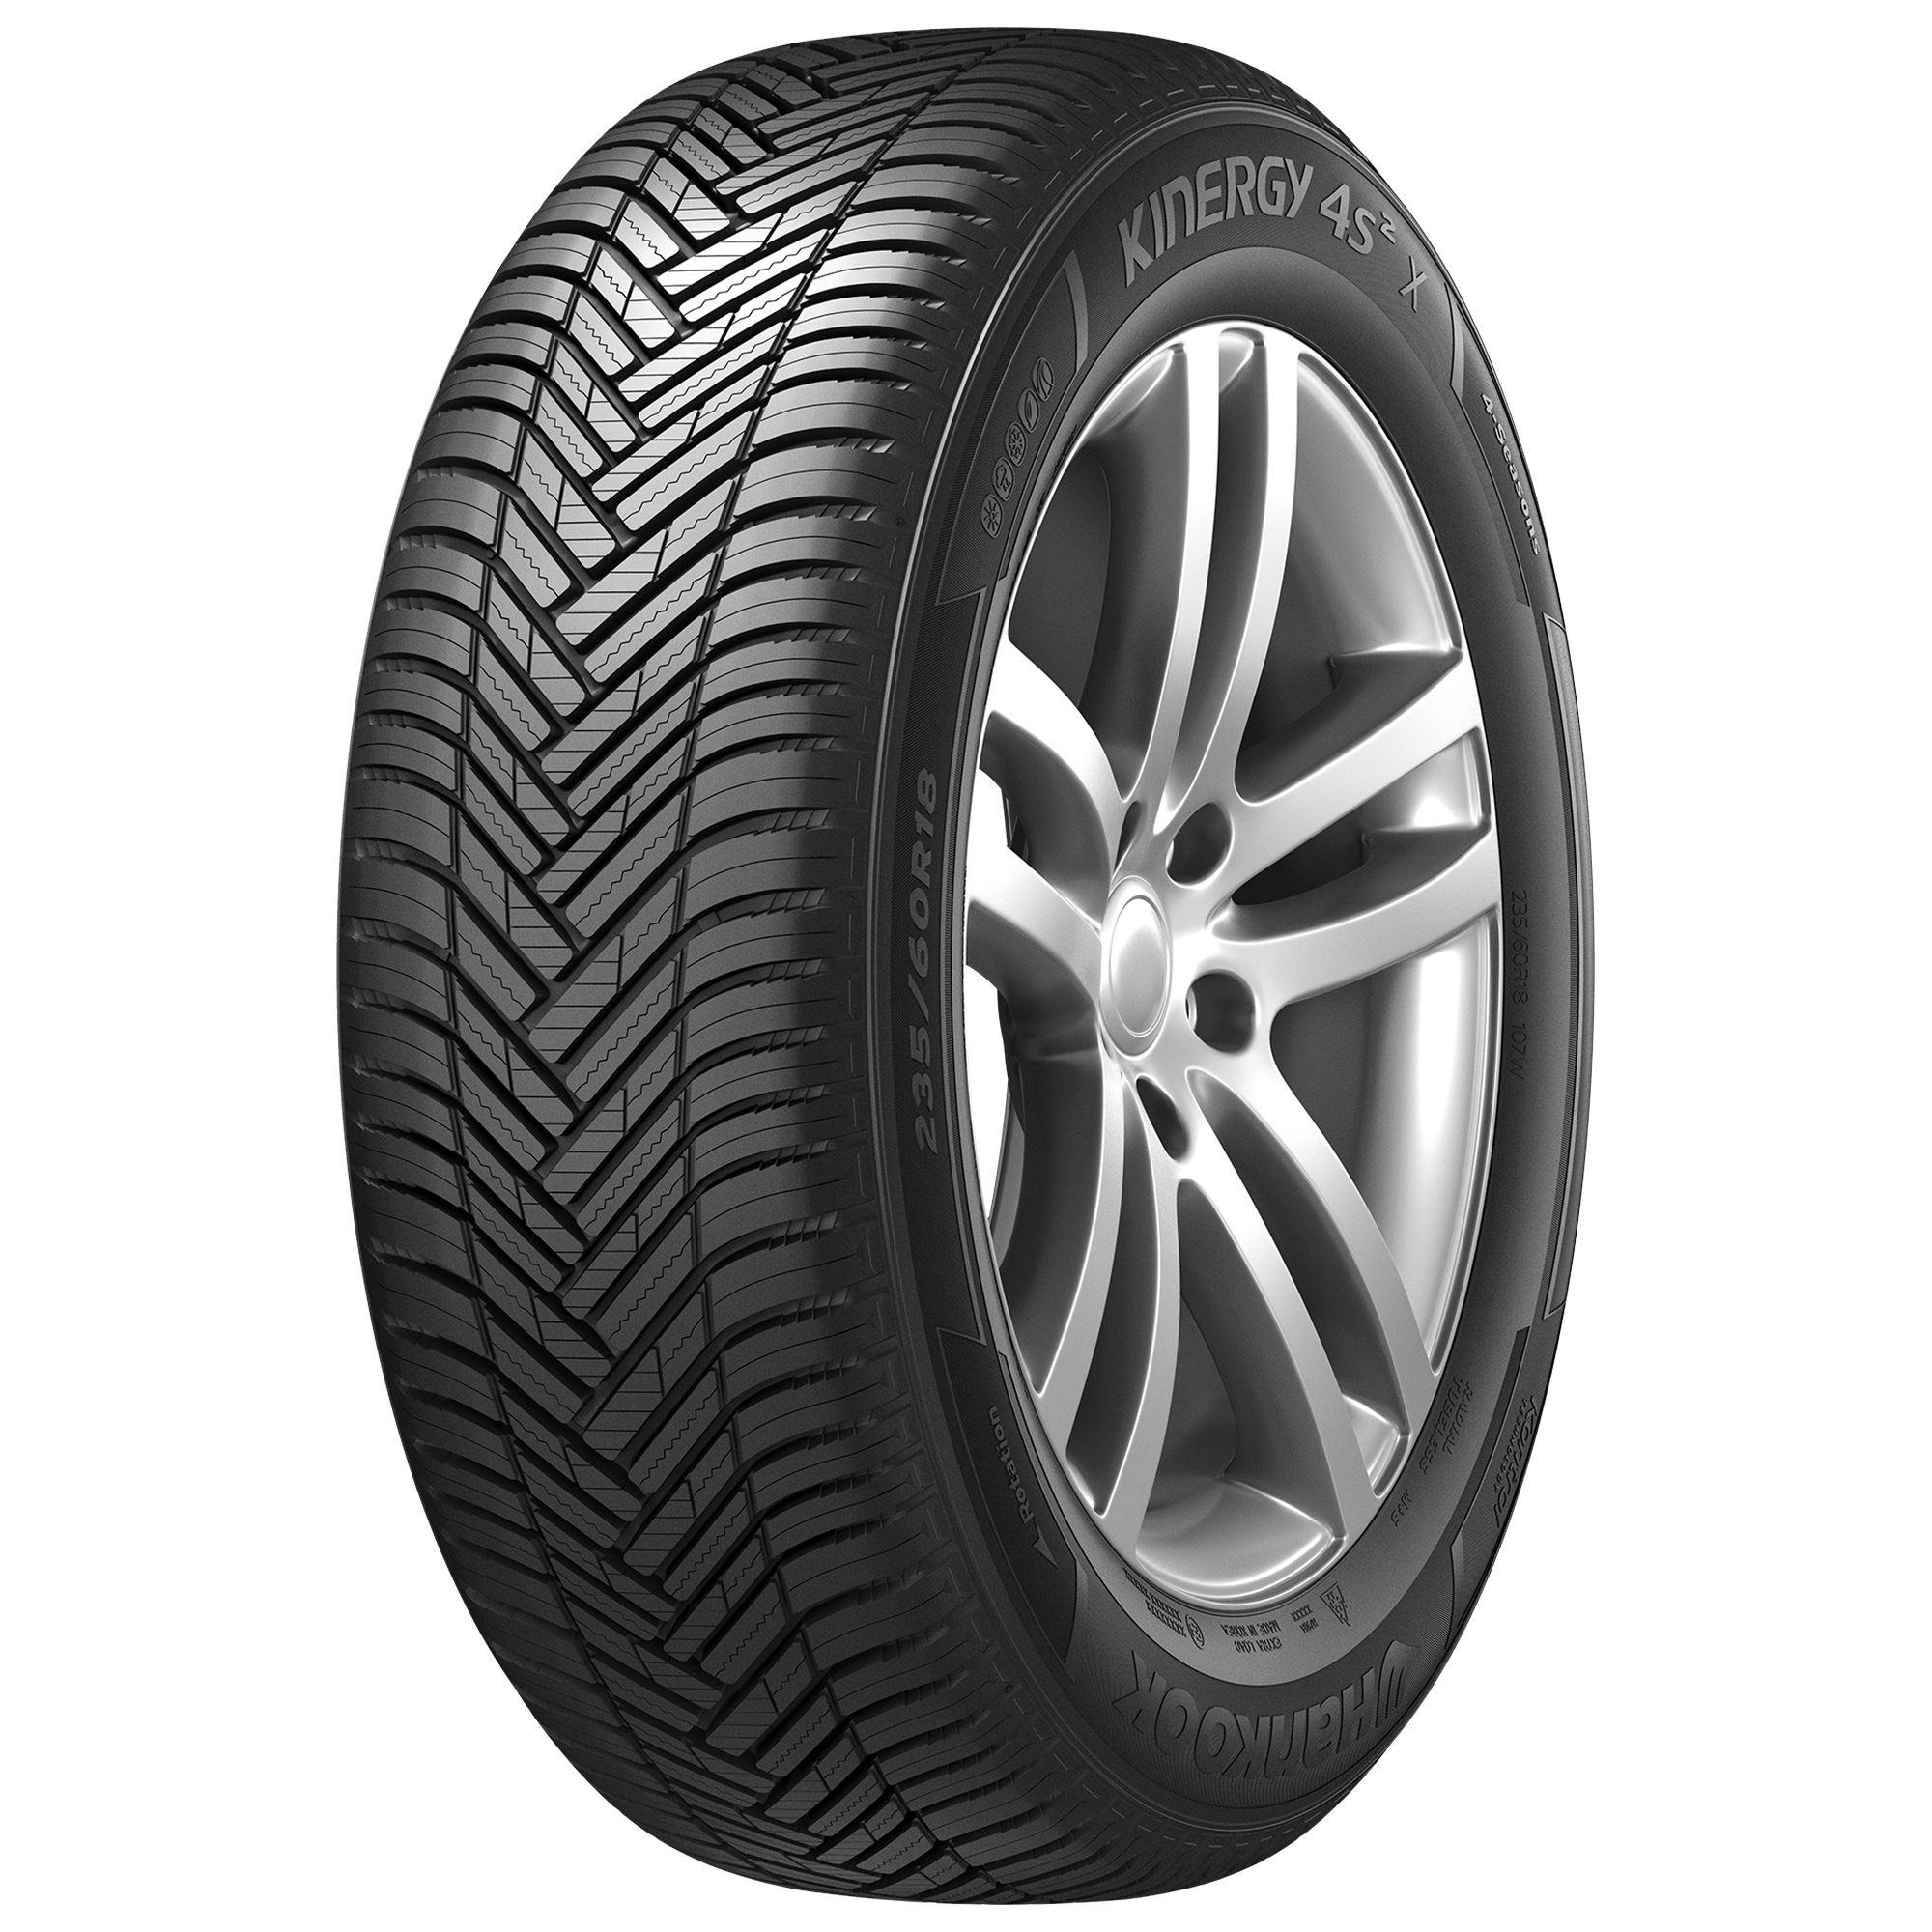 HANKOOK KINERGY 4S 2 X (H750A) 225/65R17 106H BSW